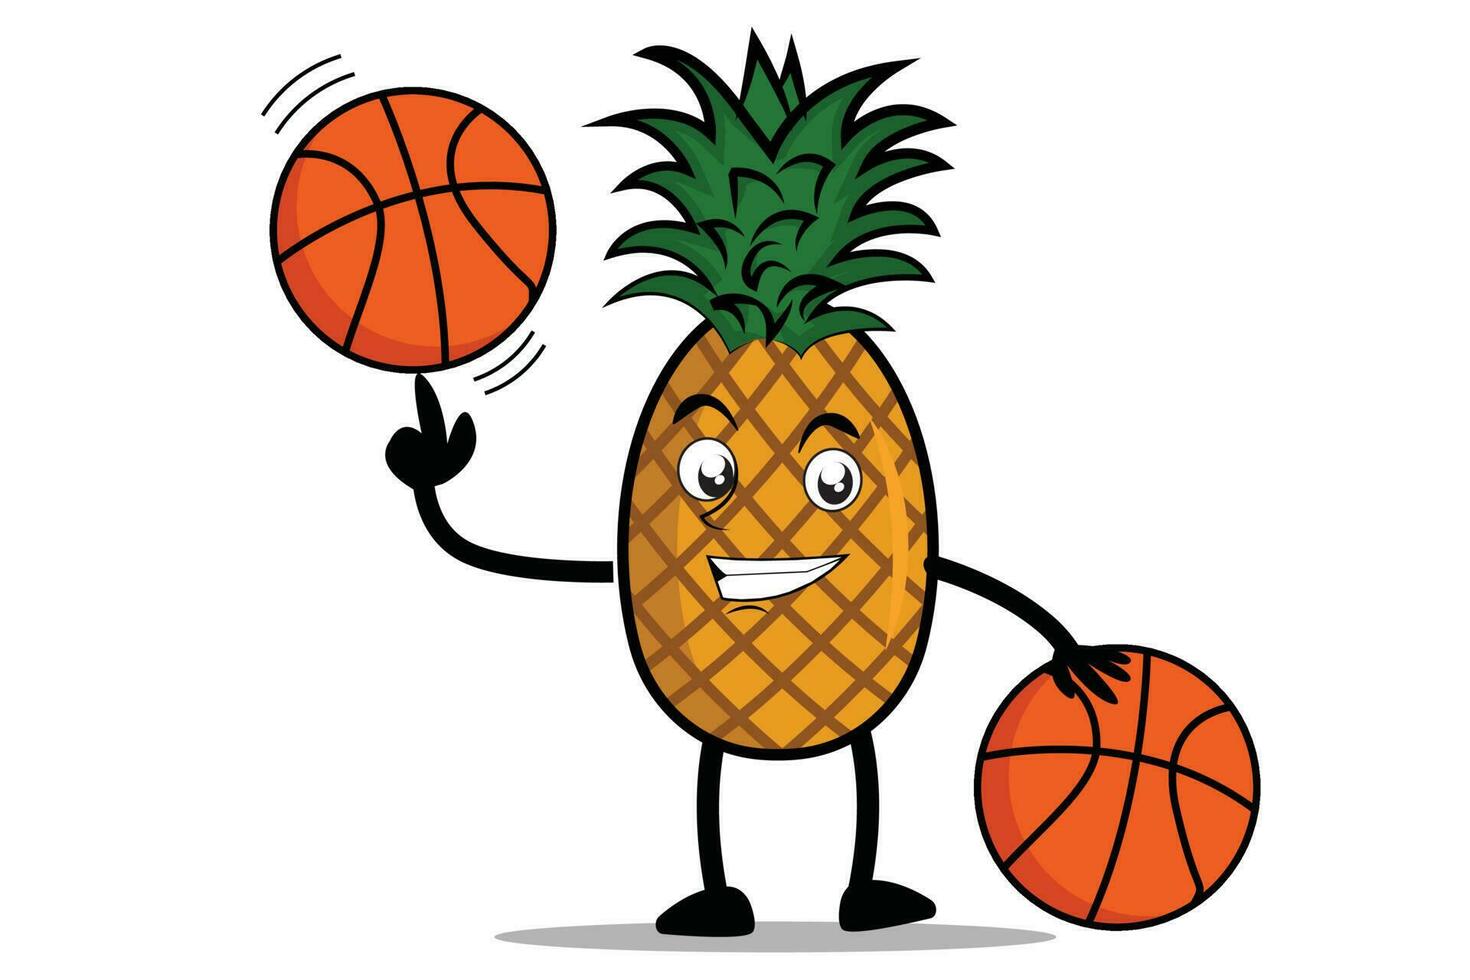 Pineapple Cartoon mascot or character plays basketball and becomes the mascot for his basketball team vector